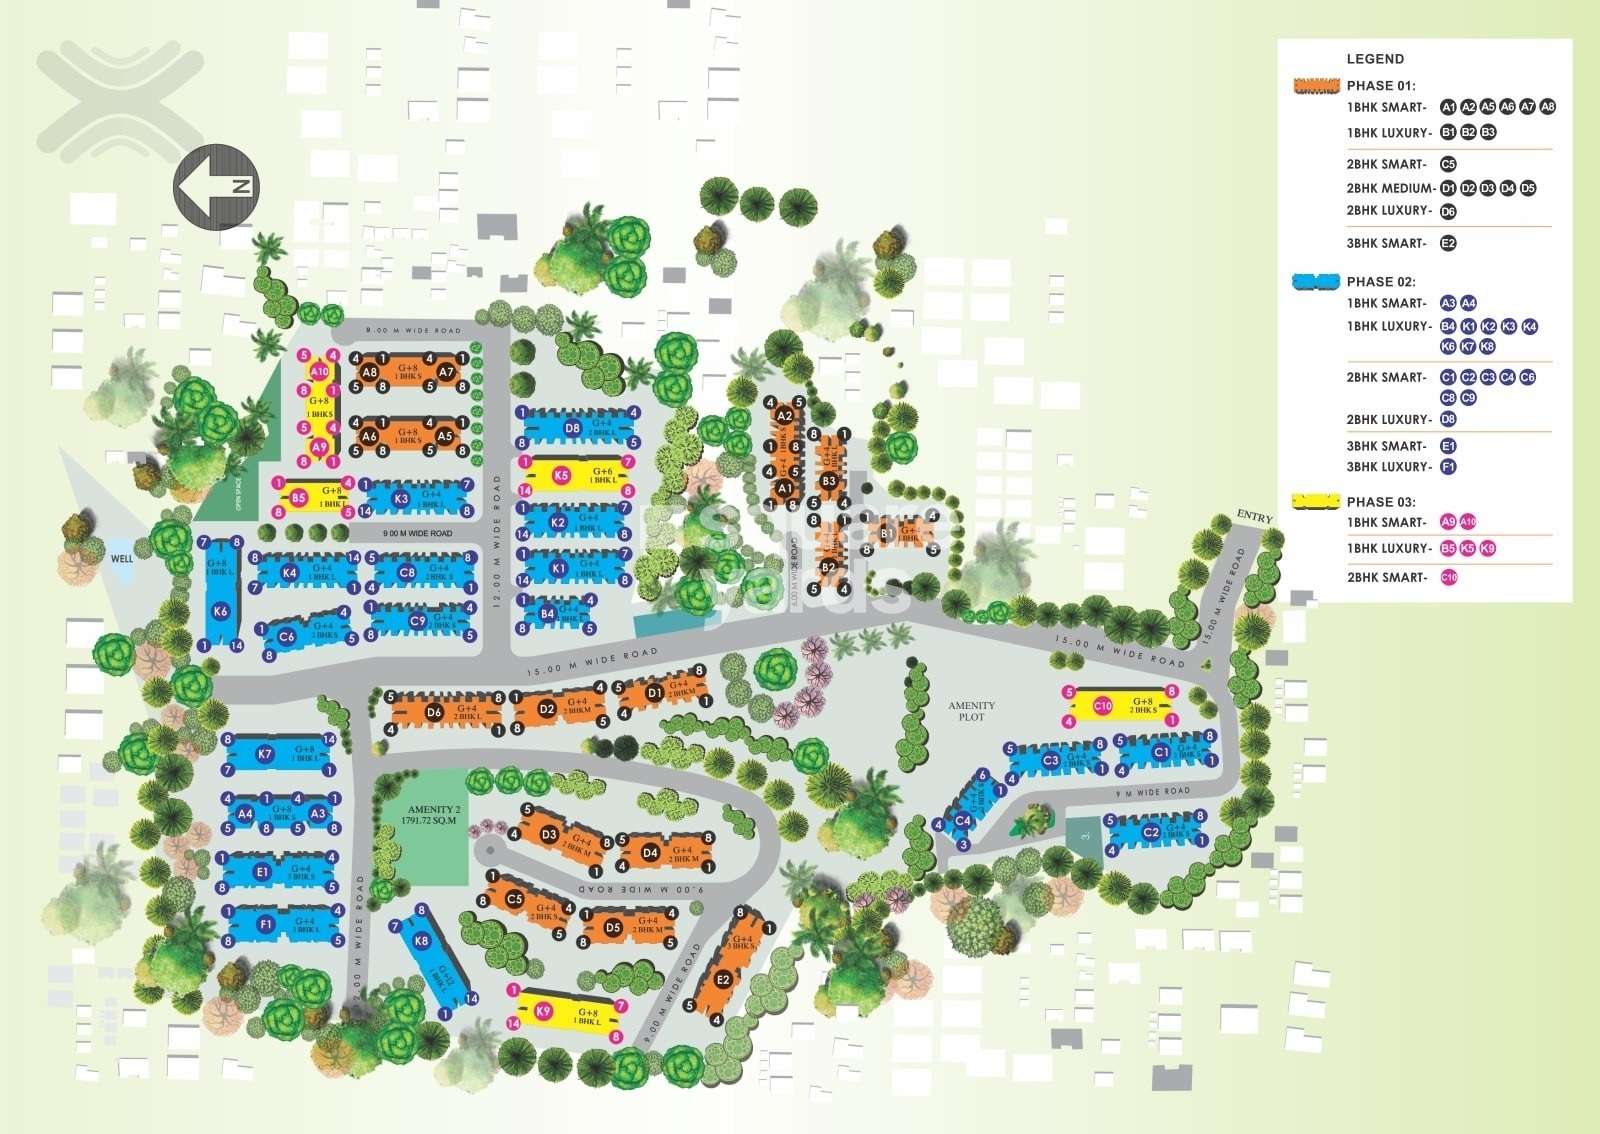 xrbia neral courtyard homes project master plan image1